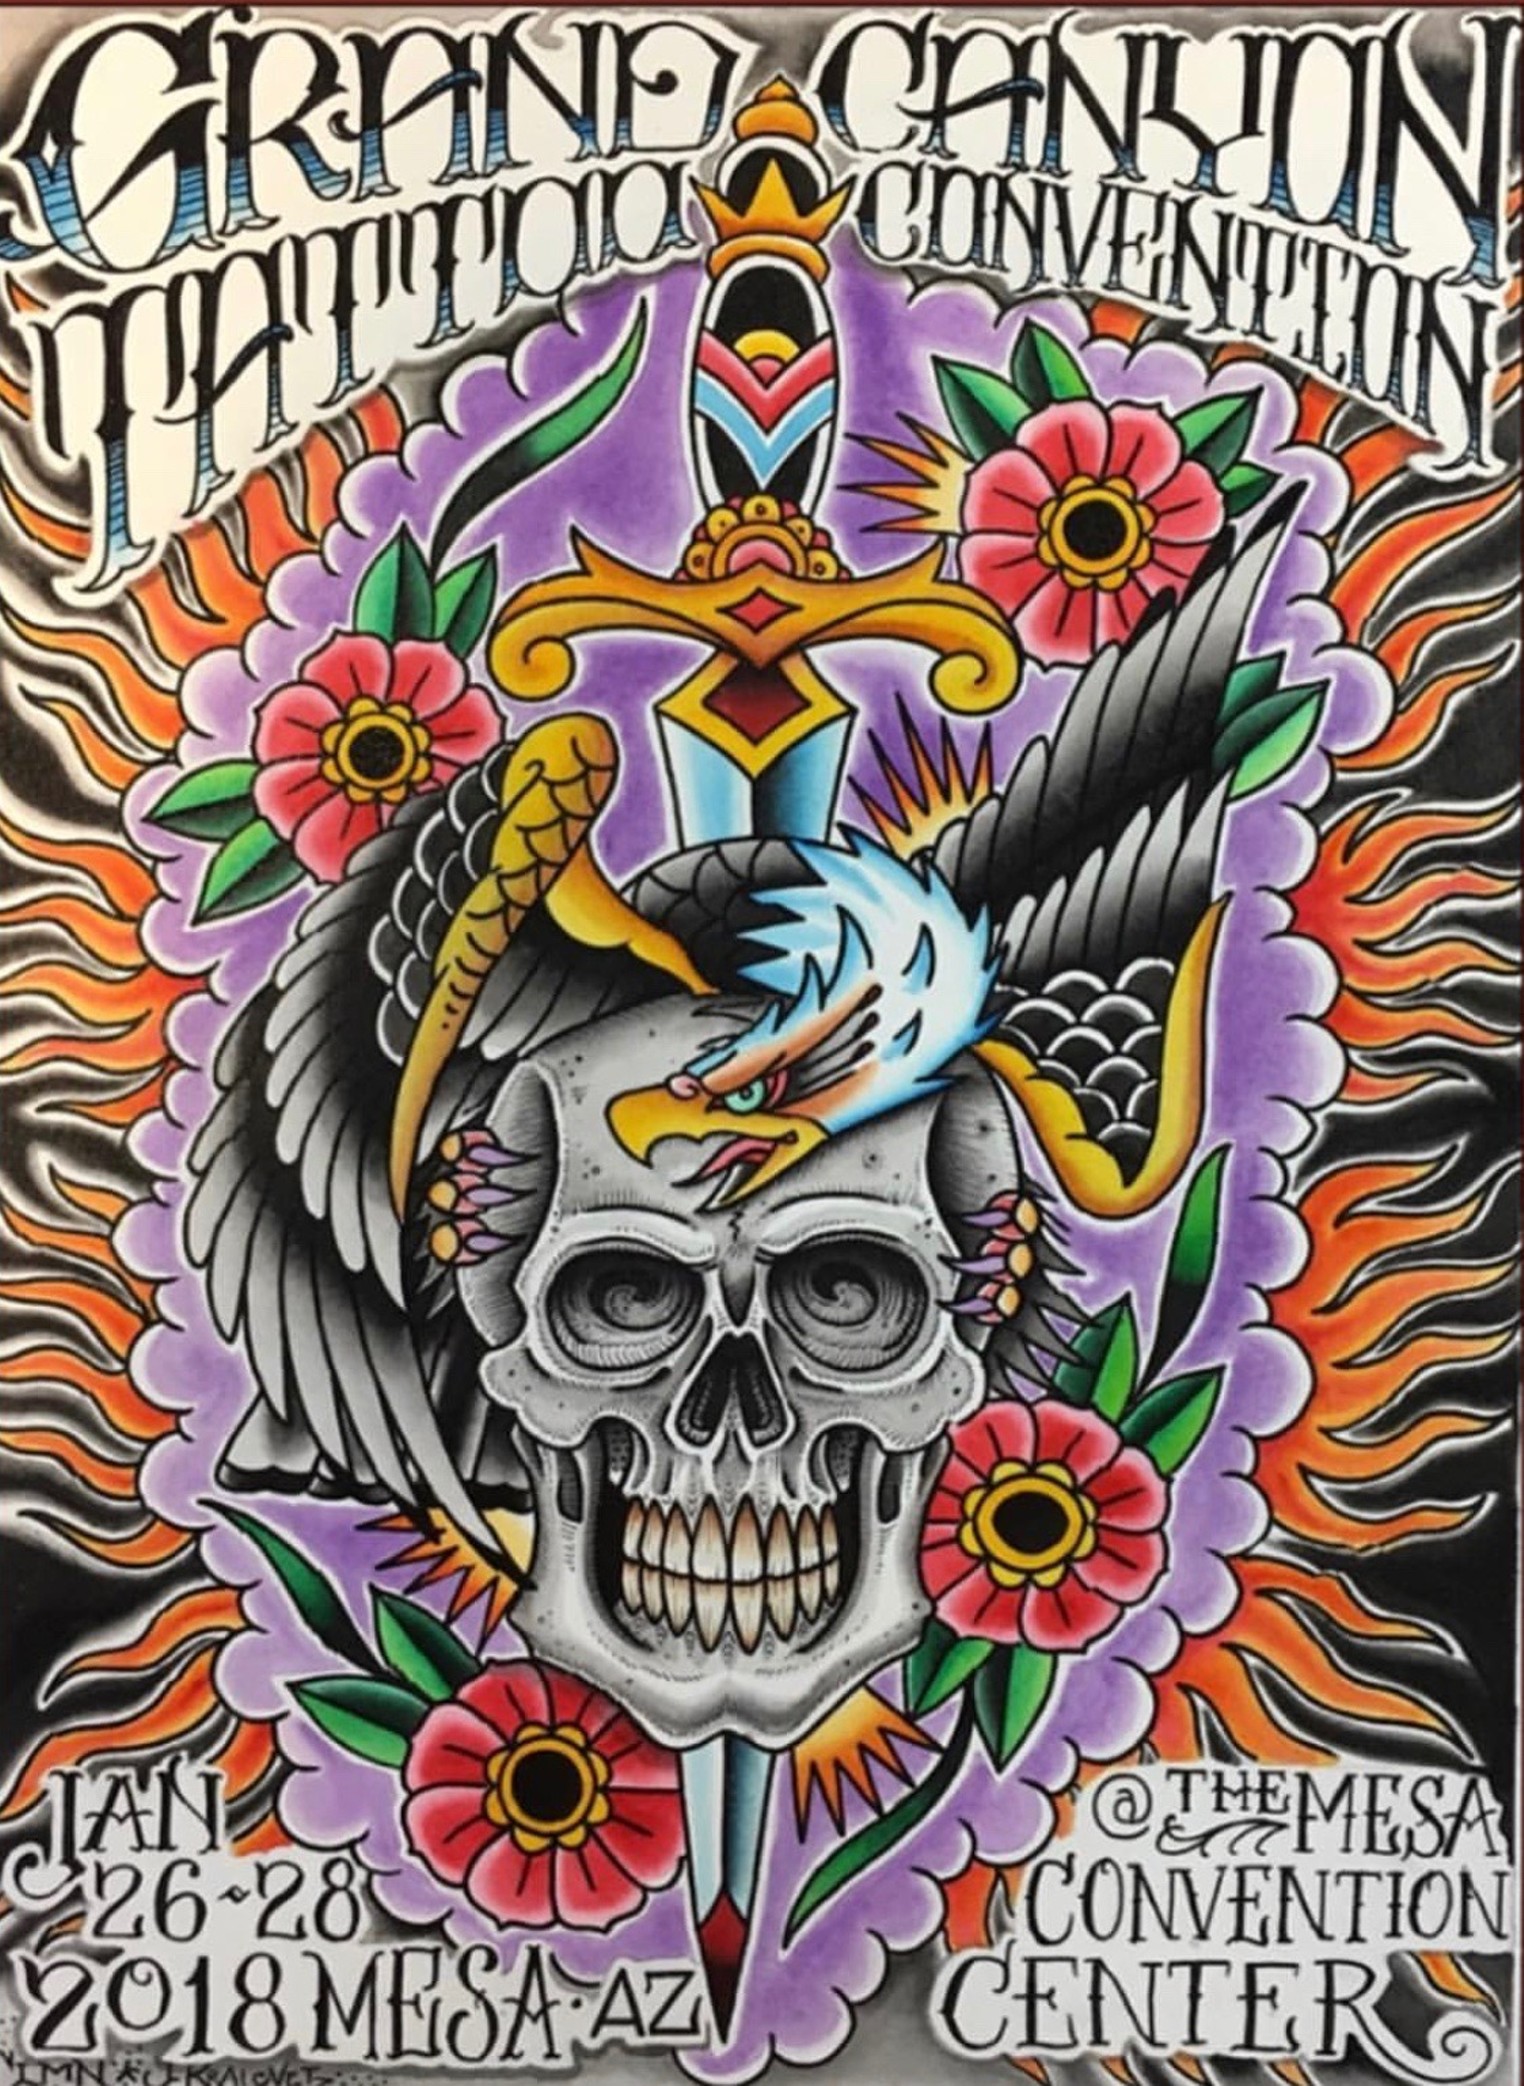 The 12th Annual  Chicago Tattoo Arts Festival  FK Irons  Tattoo  Machines Tattoo Supplies and Tattoo Accessories